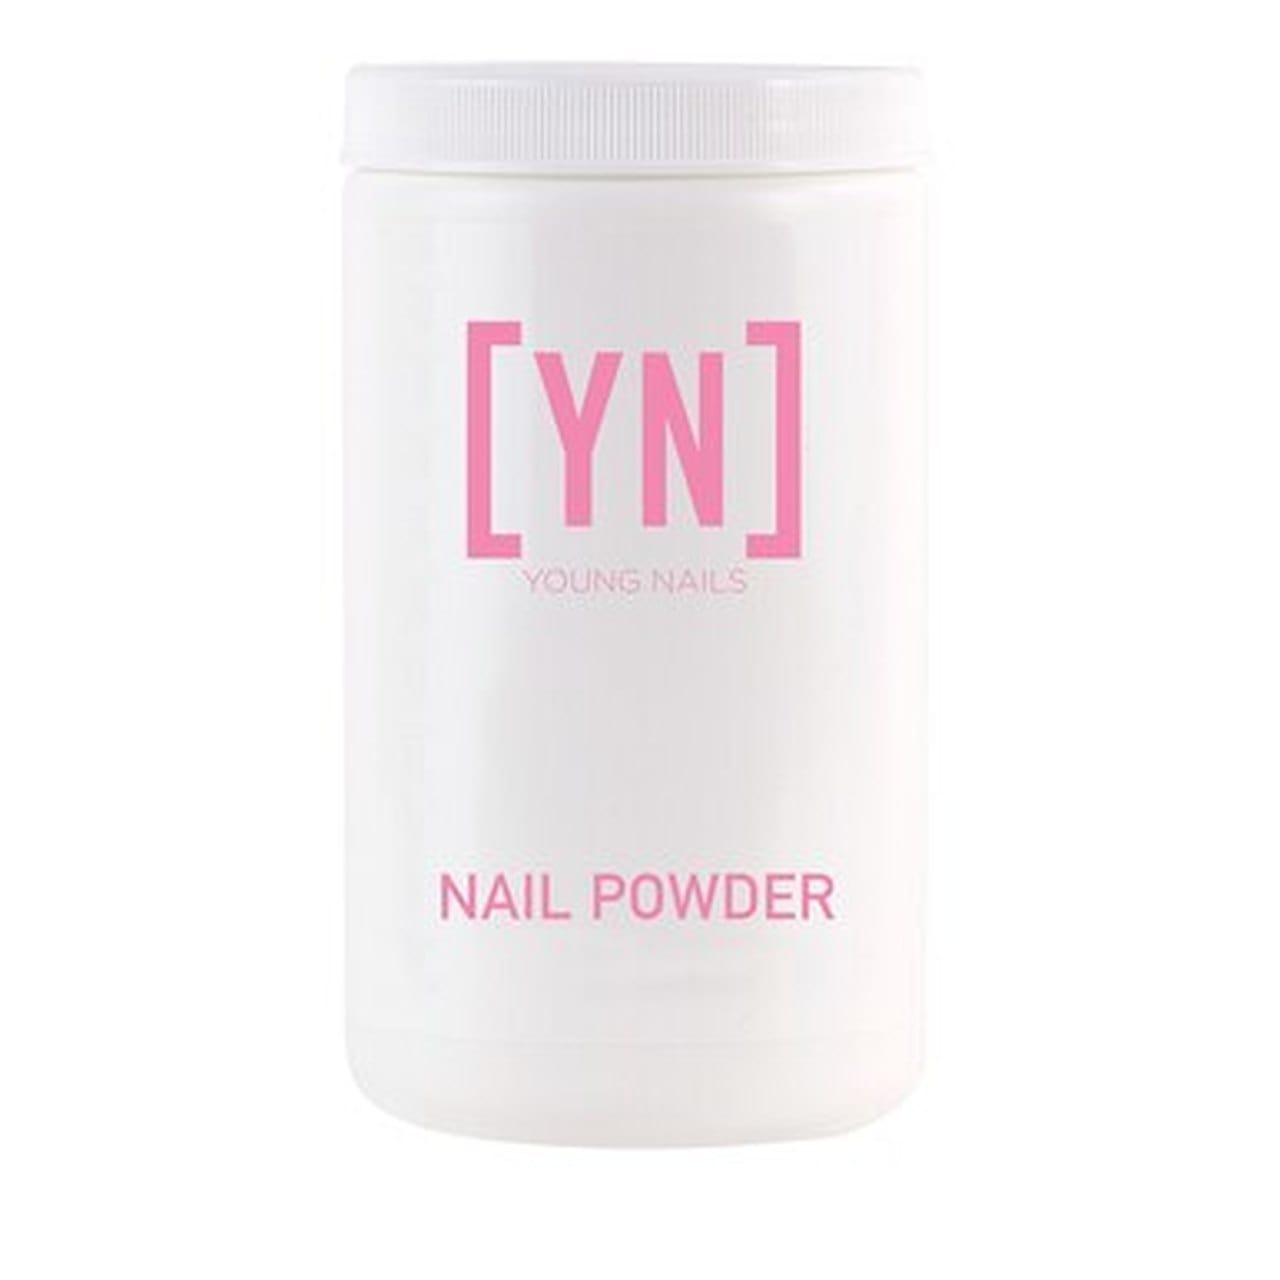 660g Speed Clear Powder Nails - Young Nails - Luxe Pacifique